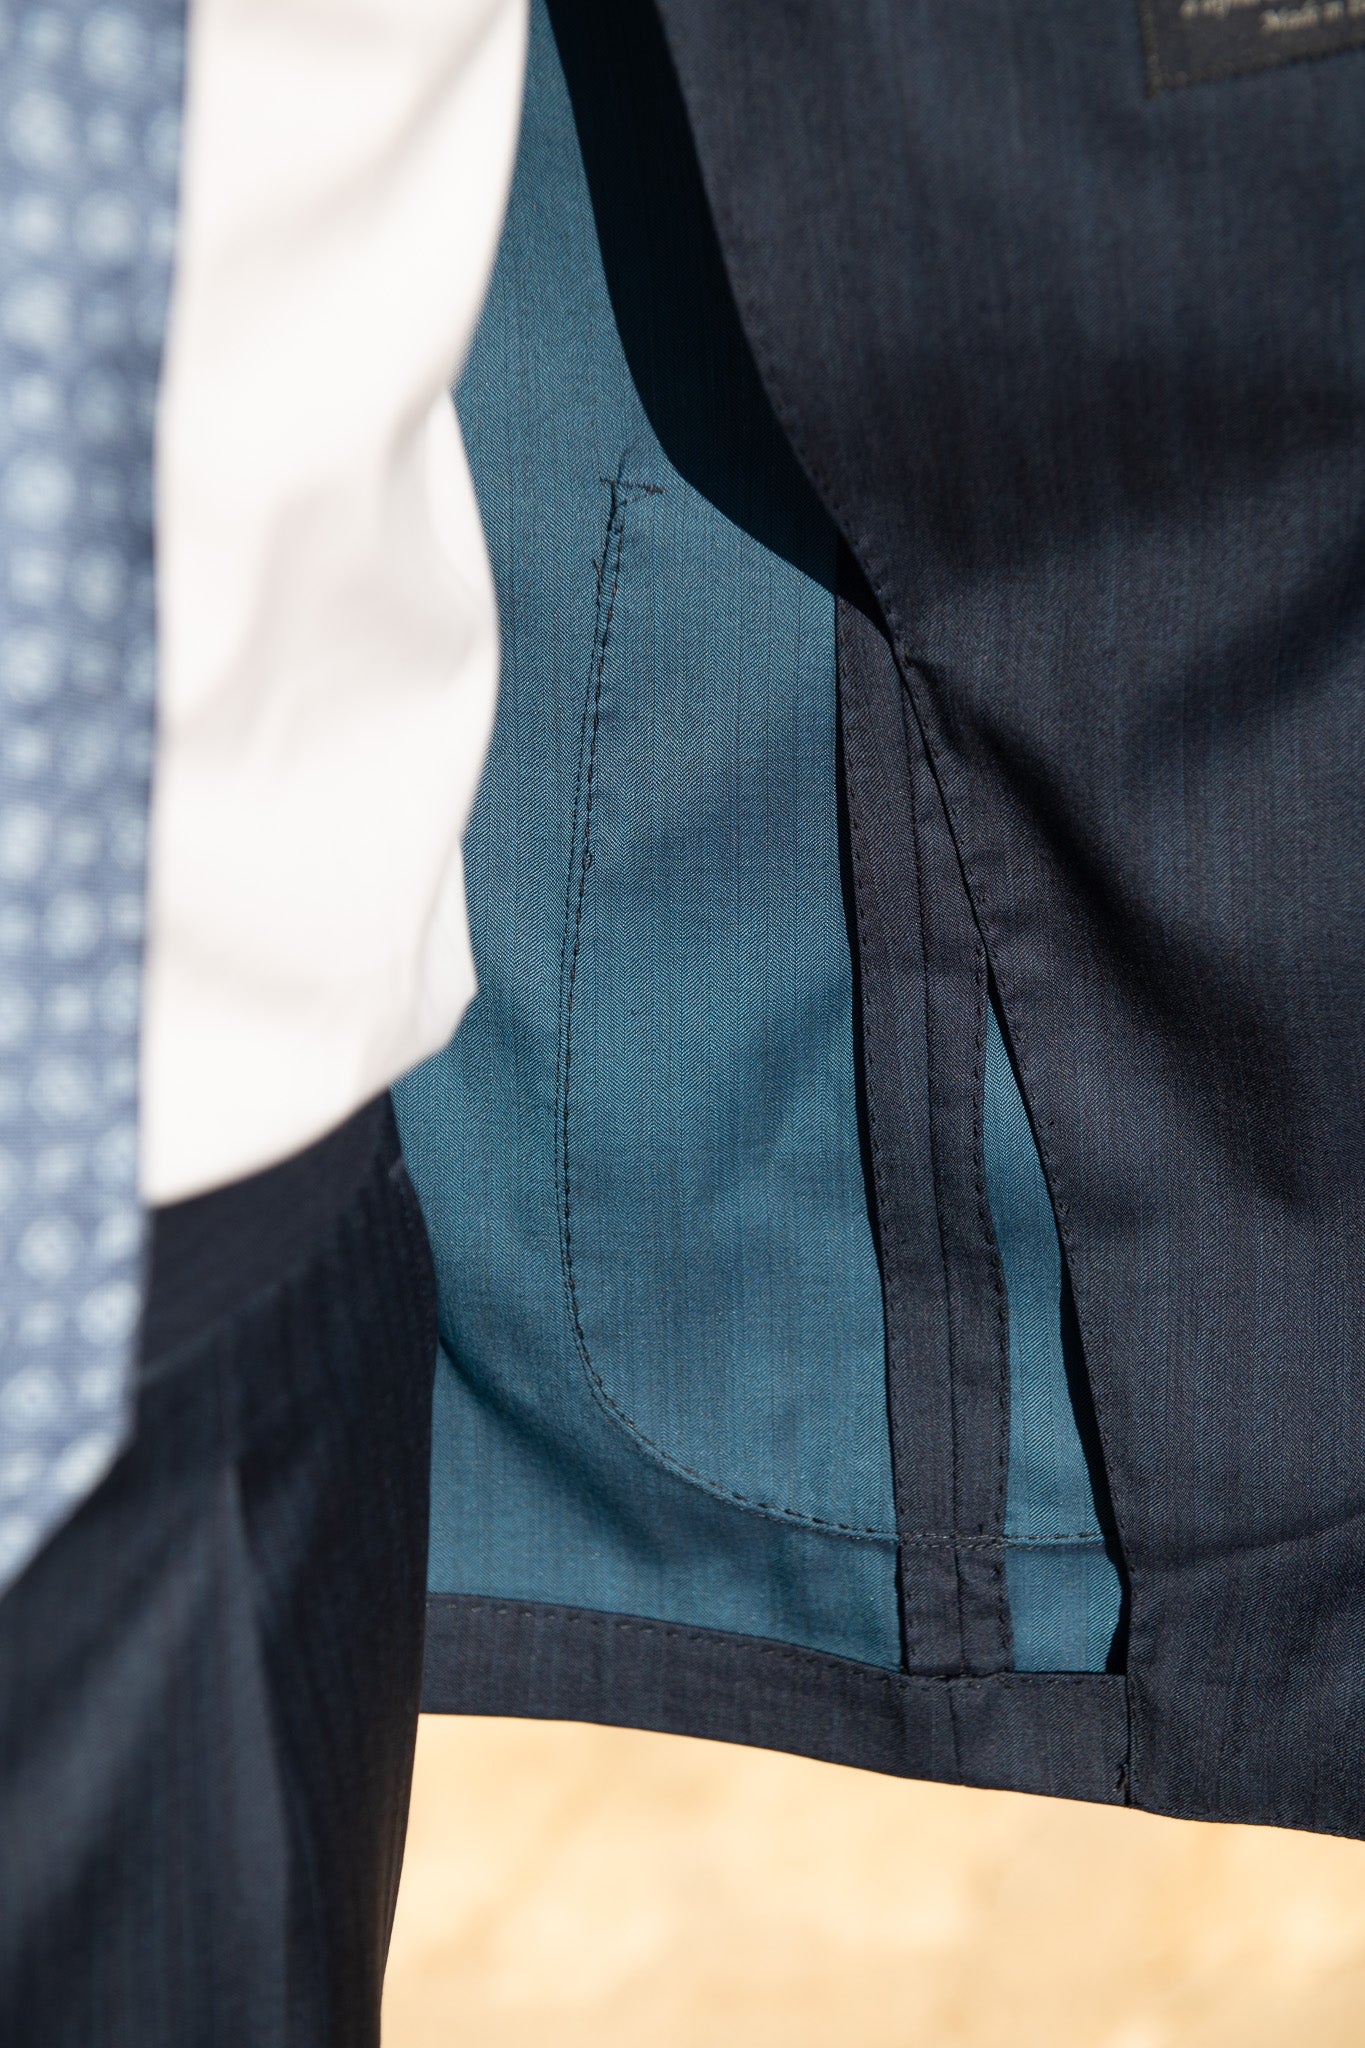 Blue solaro suit - Made in Italy